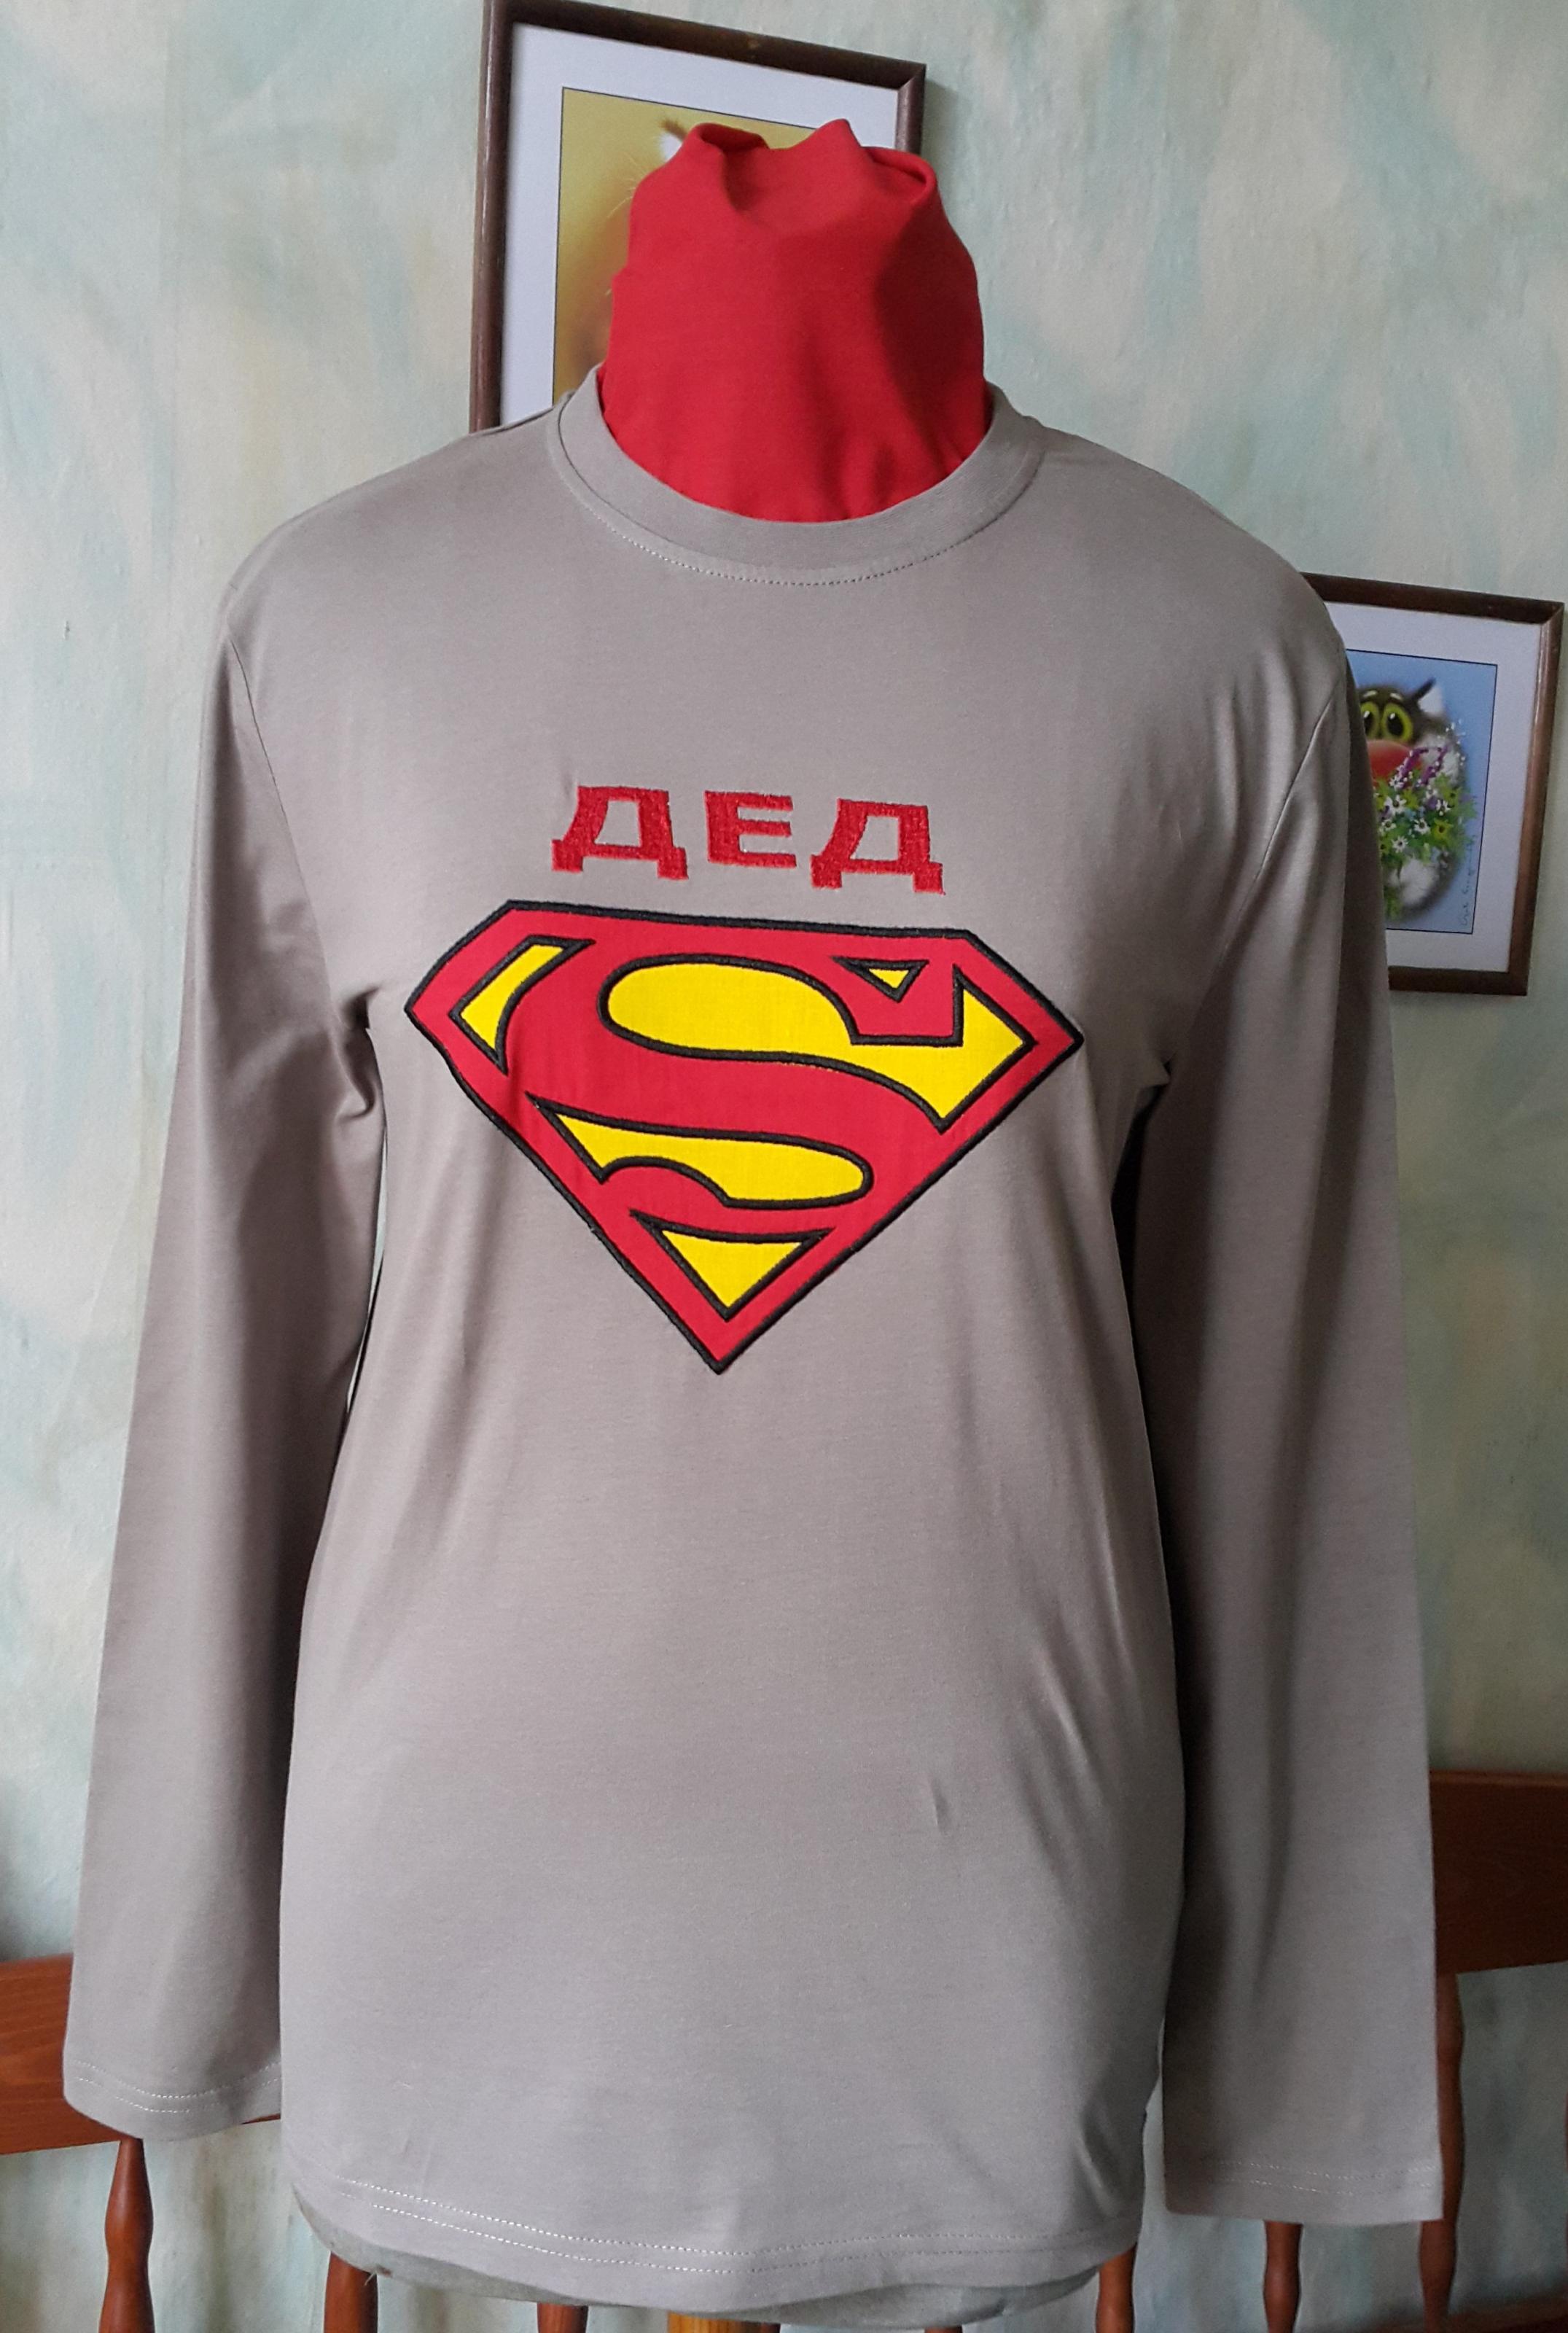 A long sleeve T-shirt with a Superman logo embroidery design